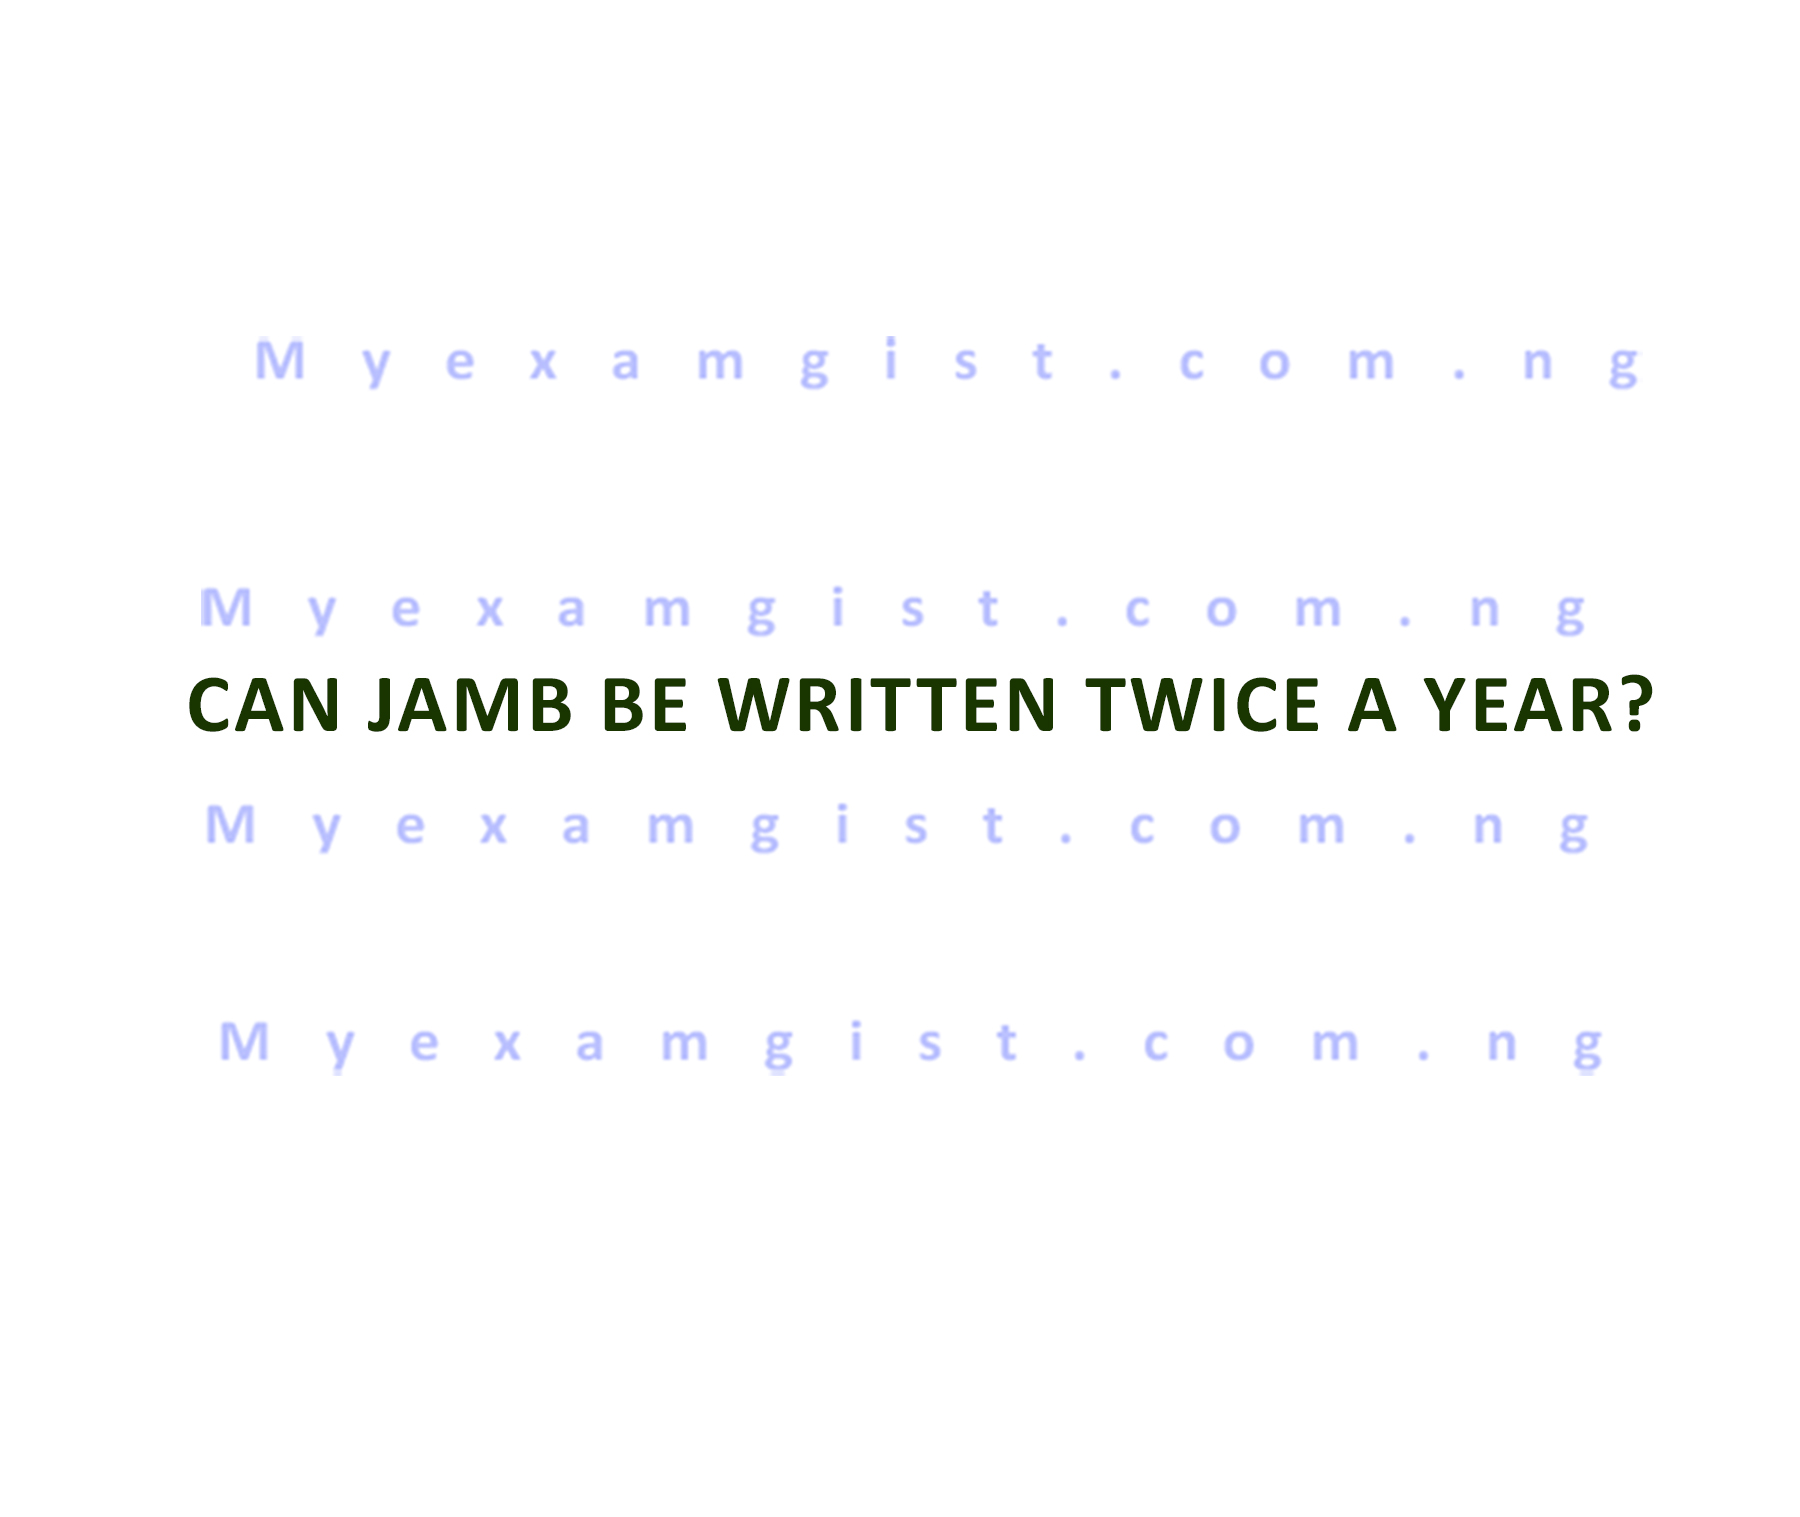 Can JAMB be written twice a year?